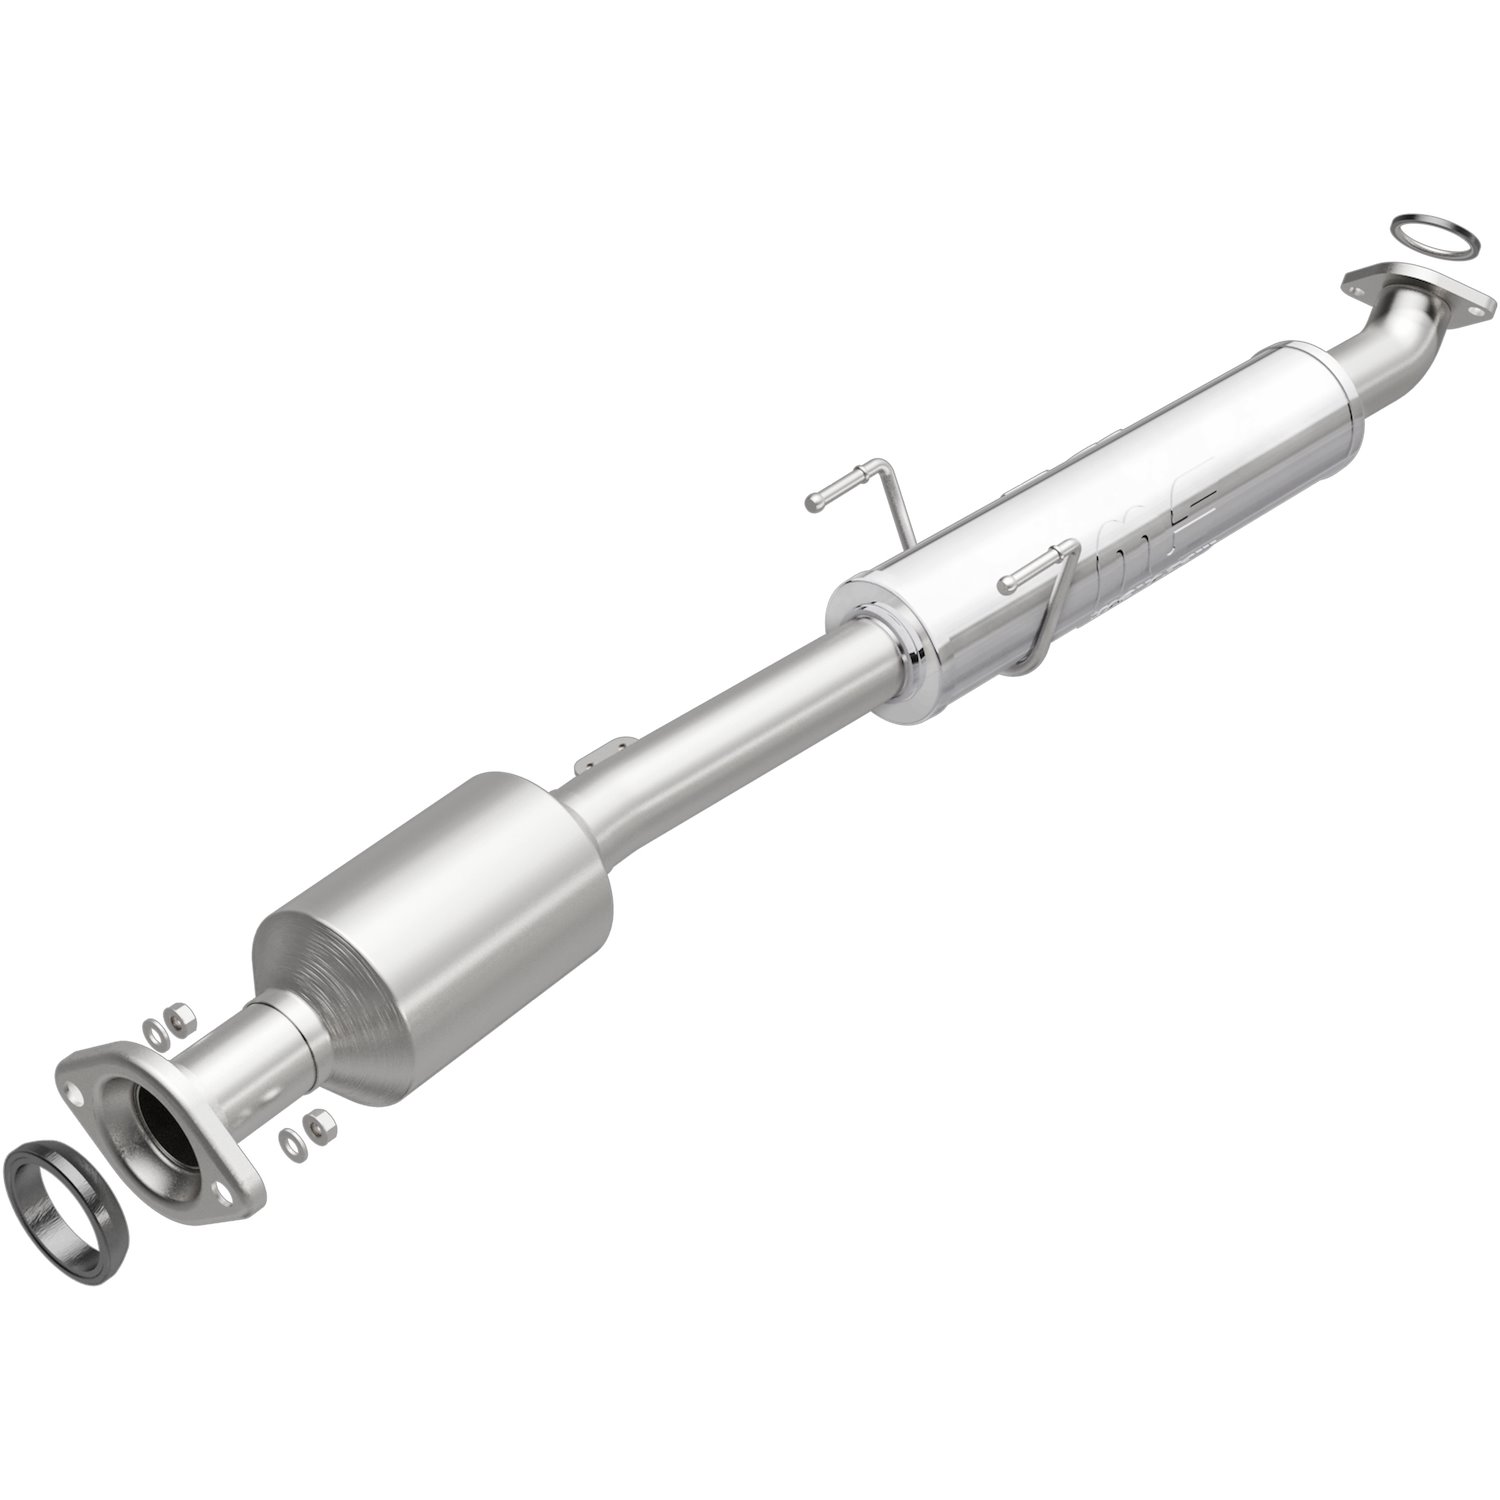 2007-2010 Toyota Sienna OEM Grade Federal / EPA Compliant Direct-Fit Catalytic Converter